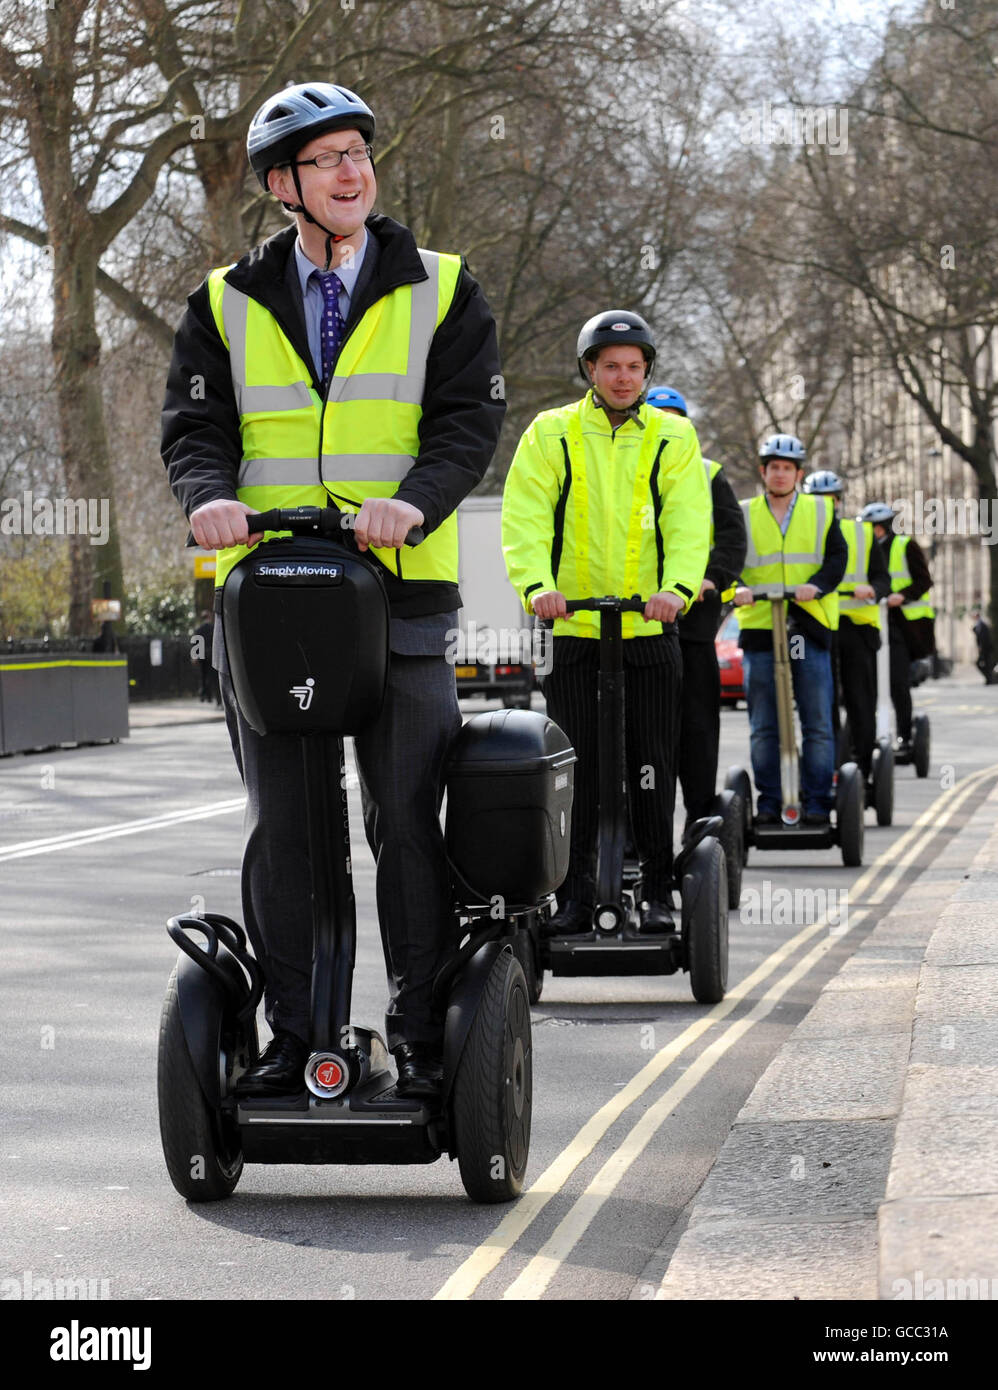 Liberal Democrat MP Lembit Opik and others ride through Westminster, London, on Segways as supporters of the two-wheeled, self-balancing mode of transport petitioned the Government to lift the roads ban on the electric vehicle. Stock Photo